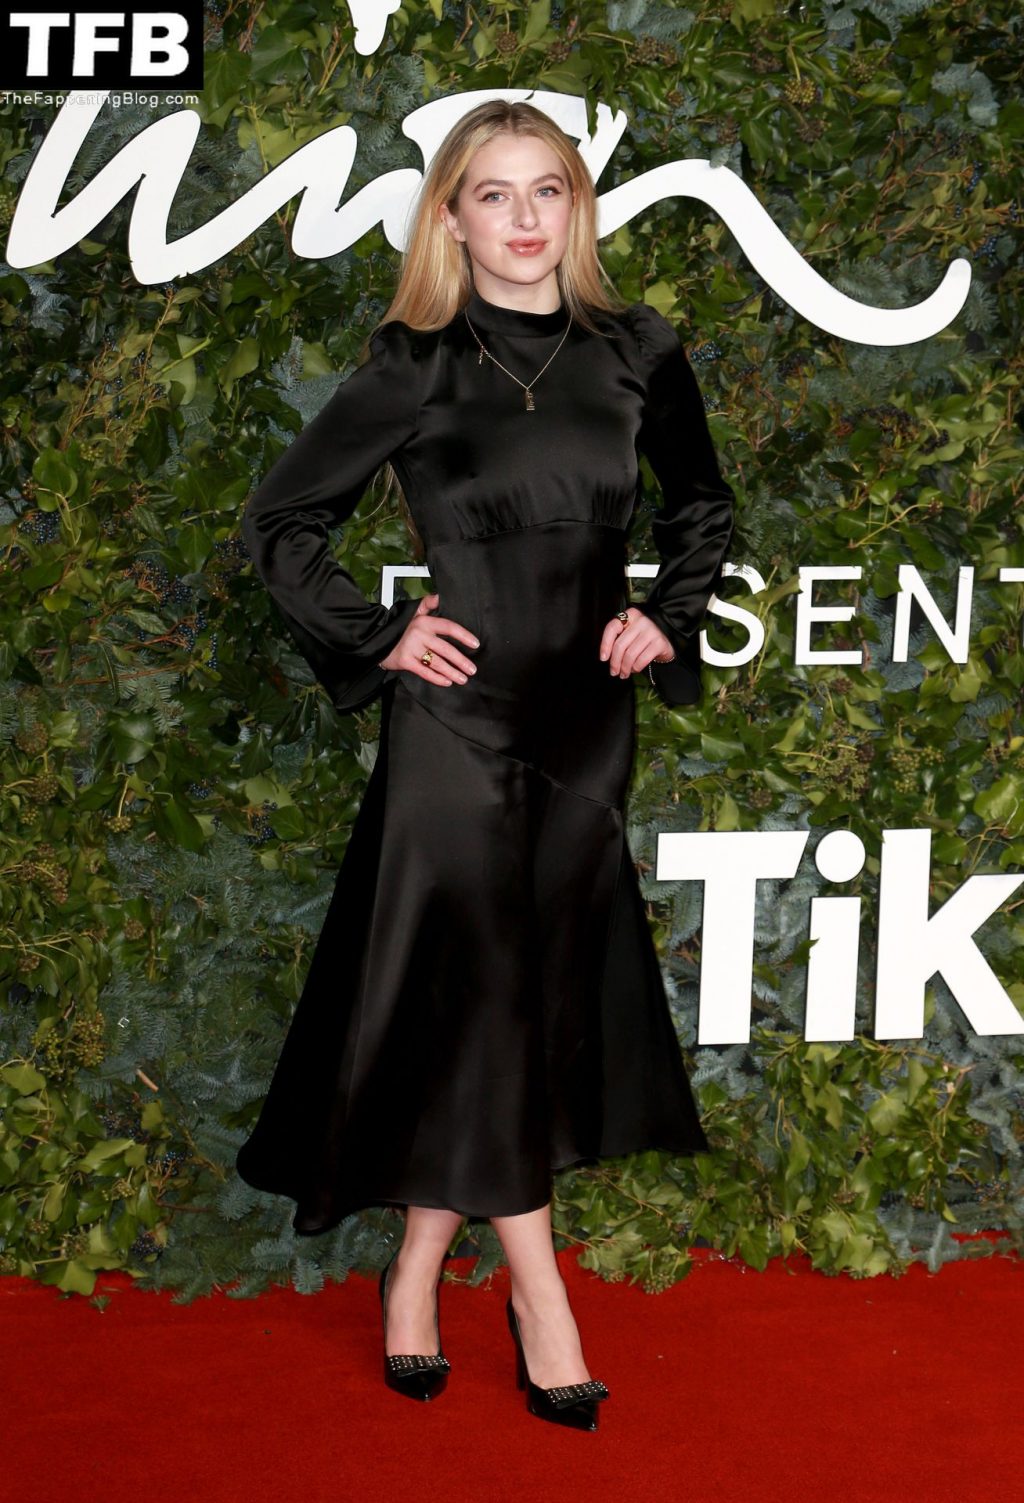 Anaïs Gallagher Shows Her Pokies in a Black Dress at The Fashion Awards 2021 in London (31 Photos)